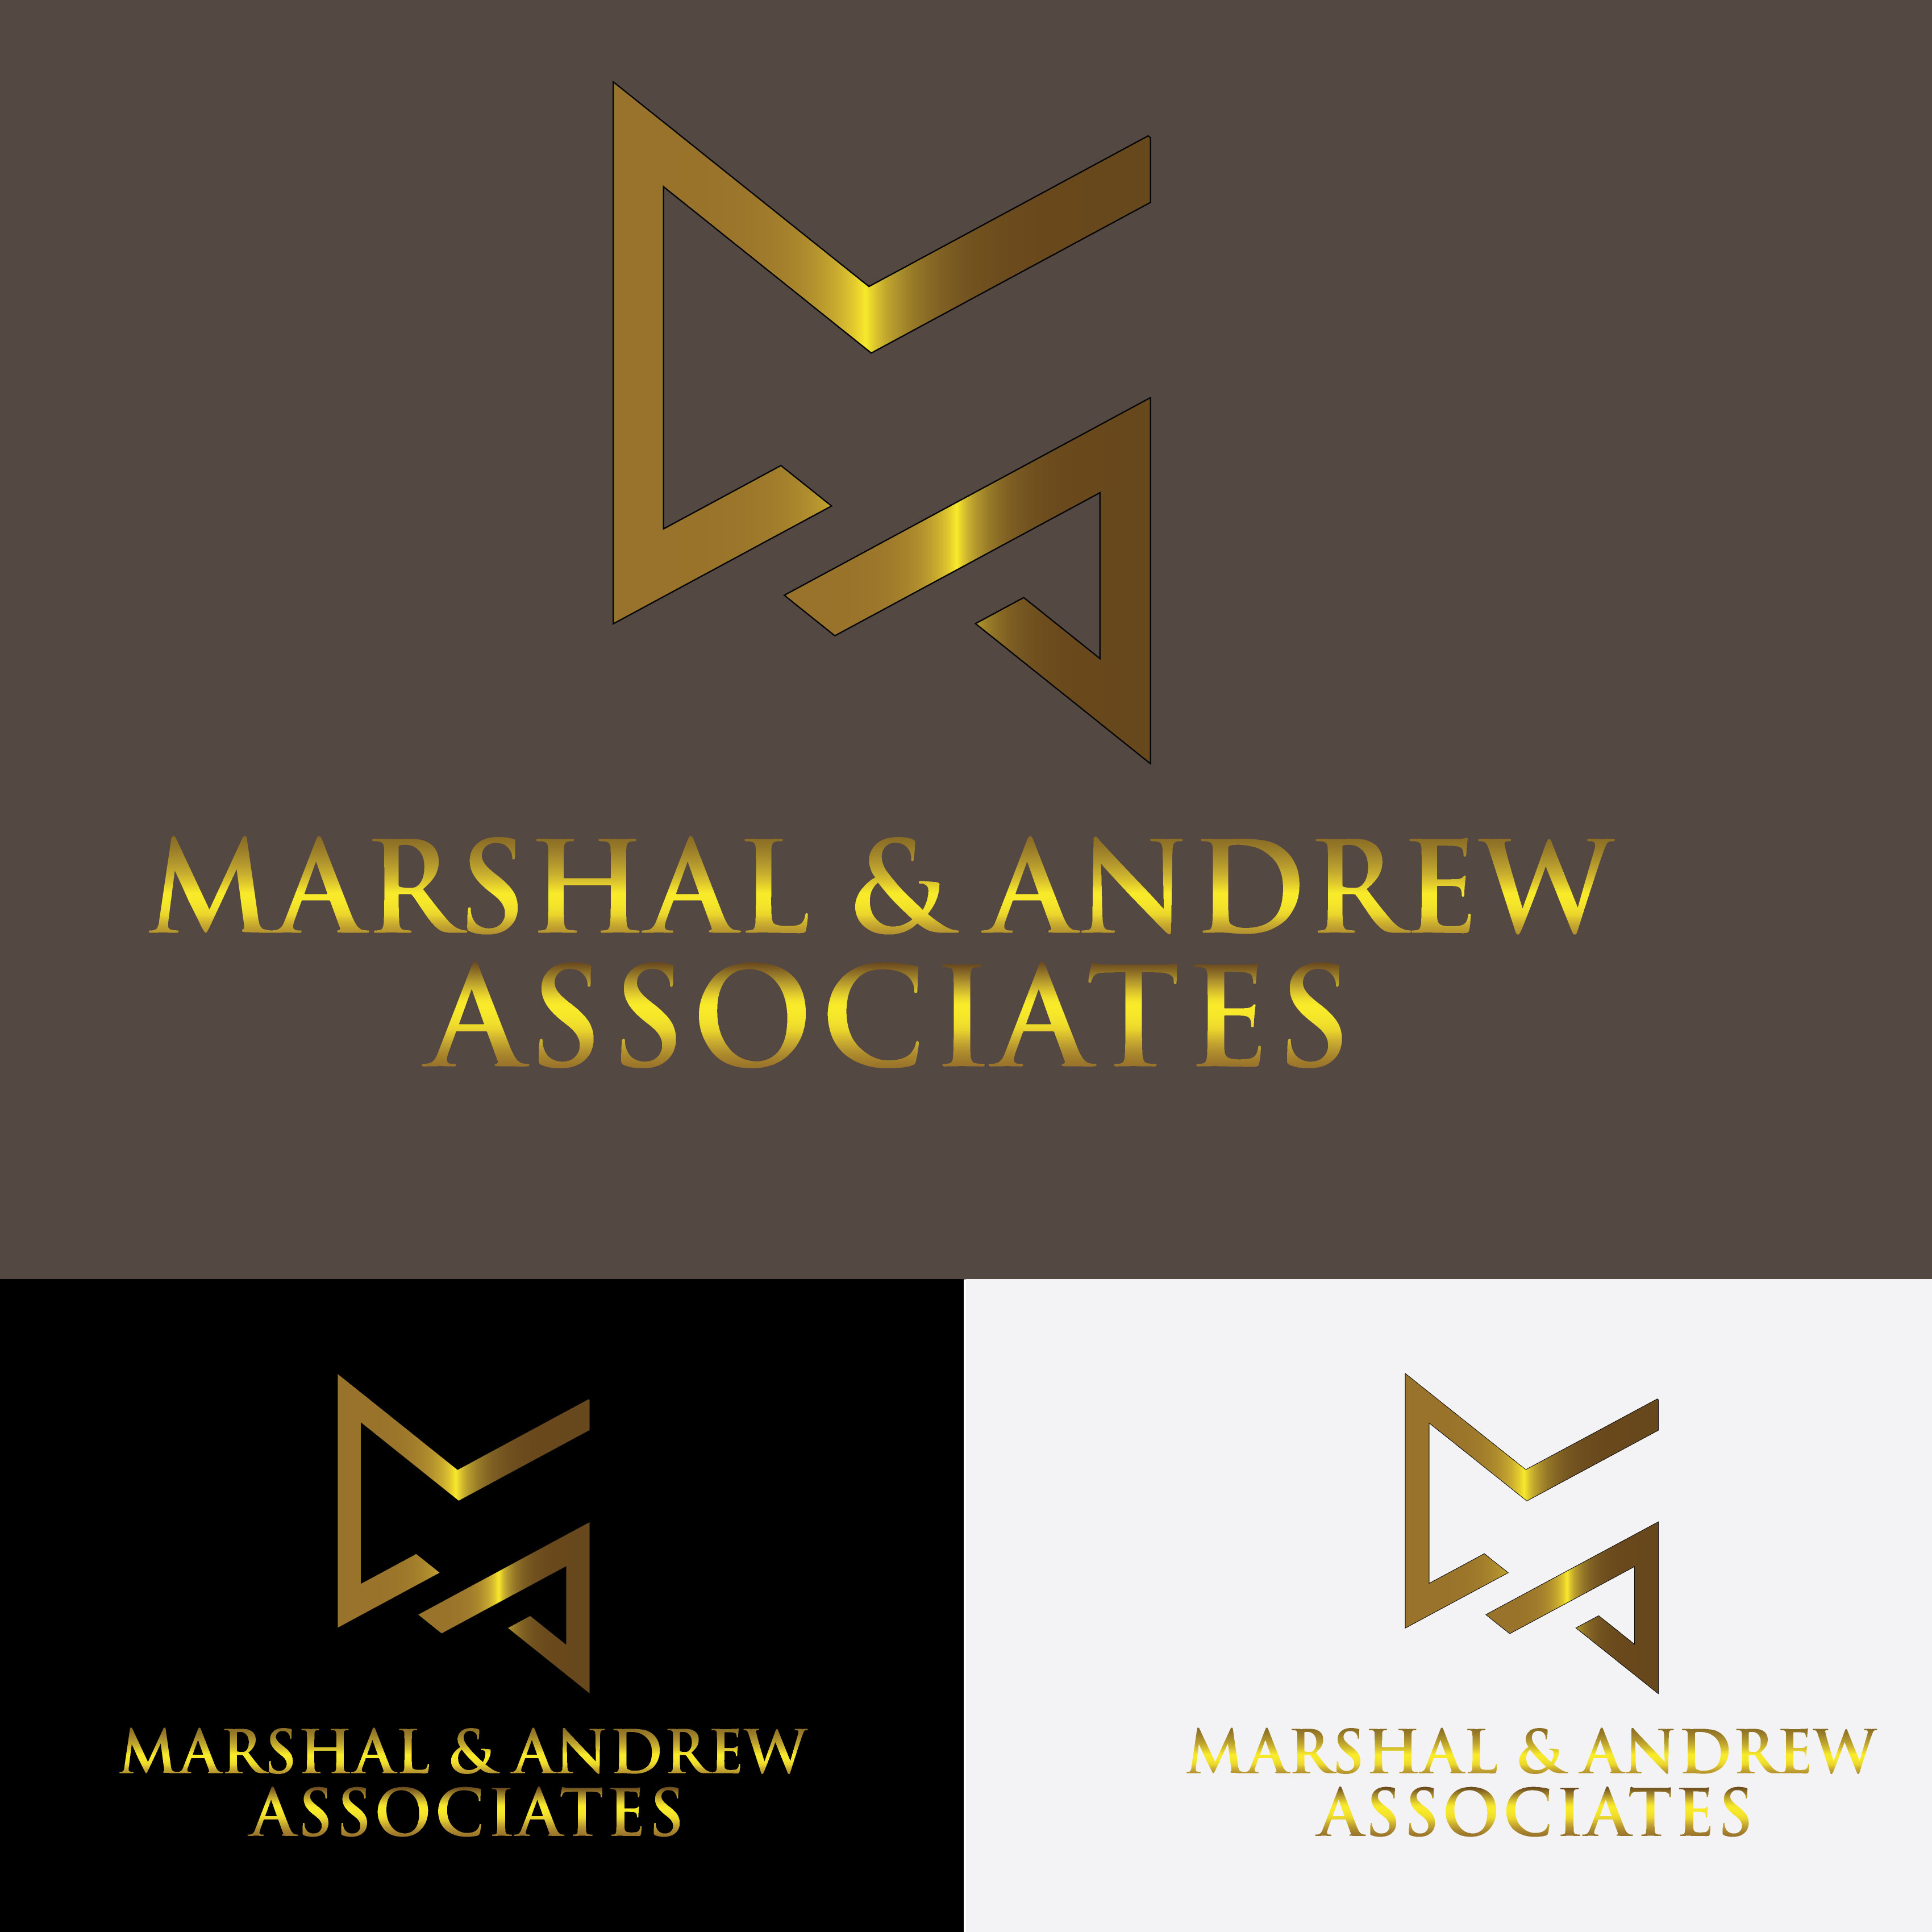 MA real estate logo (marshal and andrew associate) cover image.